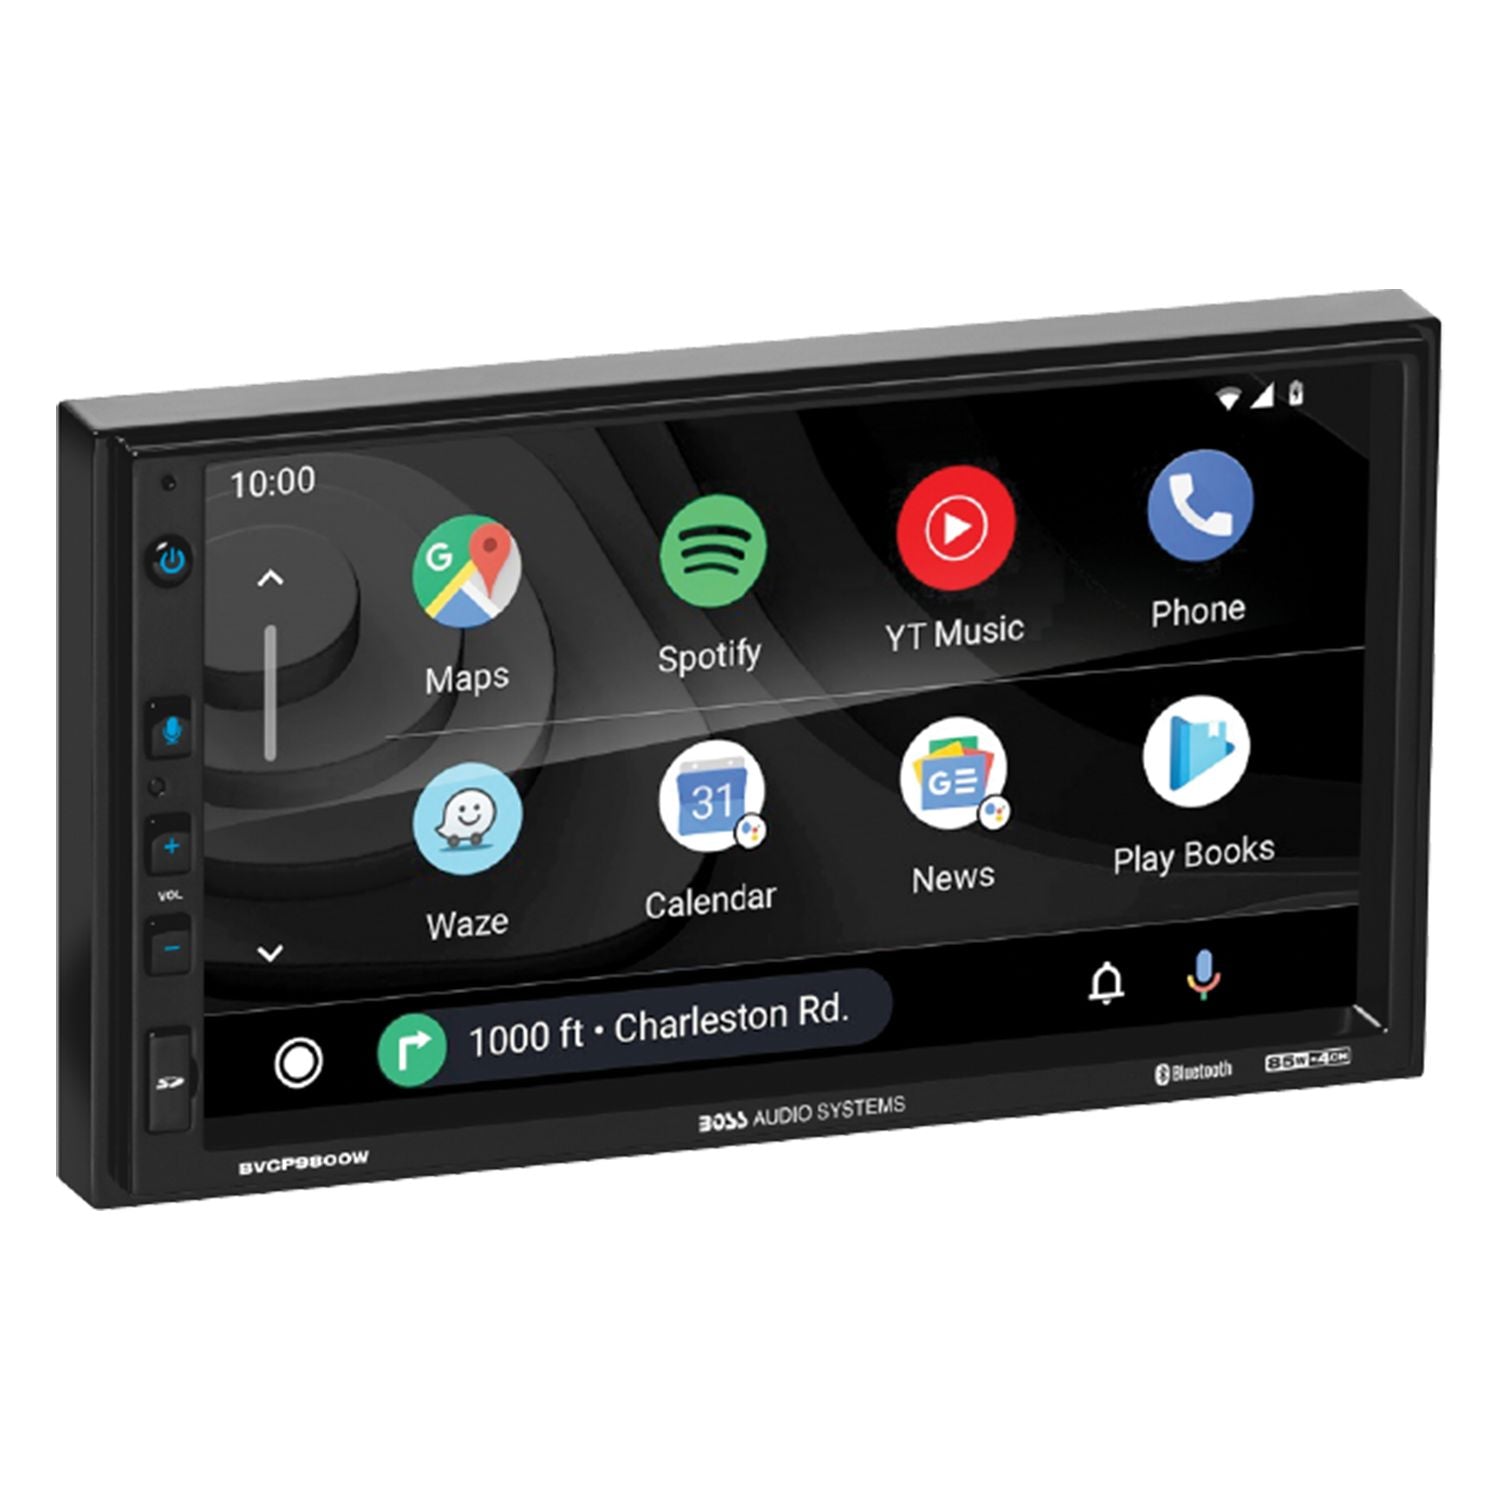 BOSS BVCP9800W - Double-DIN Apple Carplay & Android Auto 7" Touchscreen BT